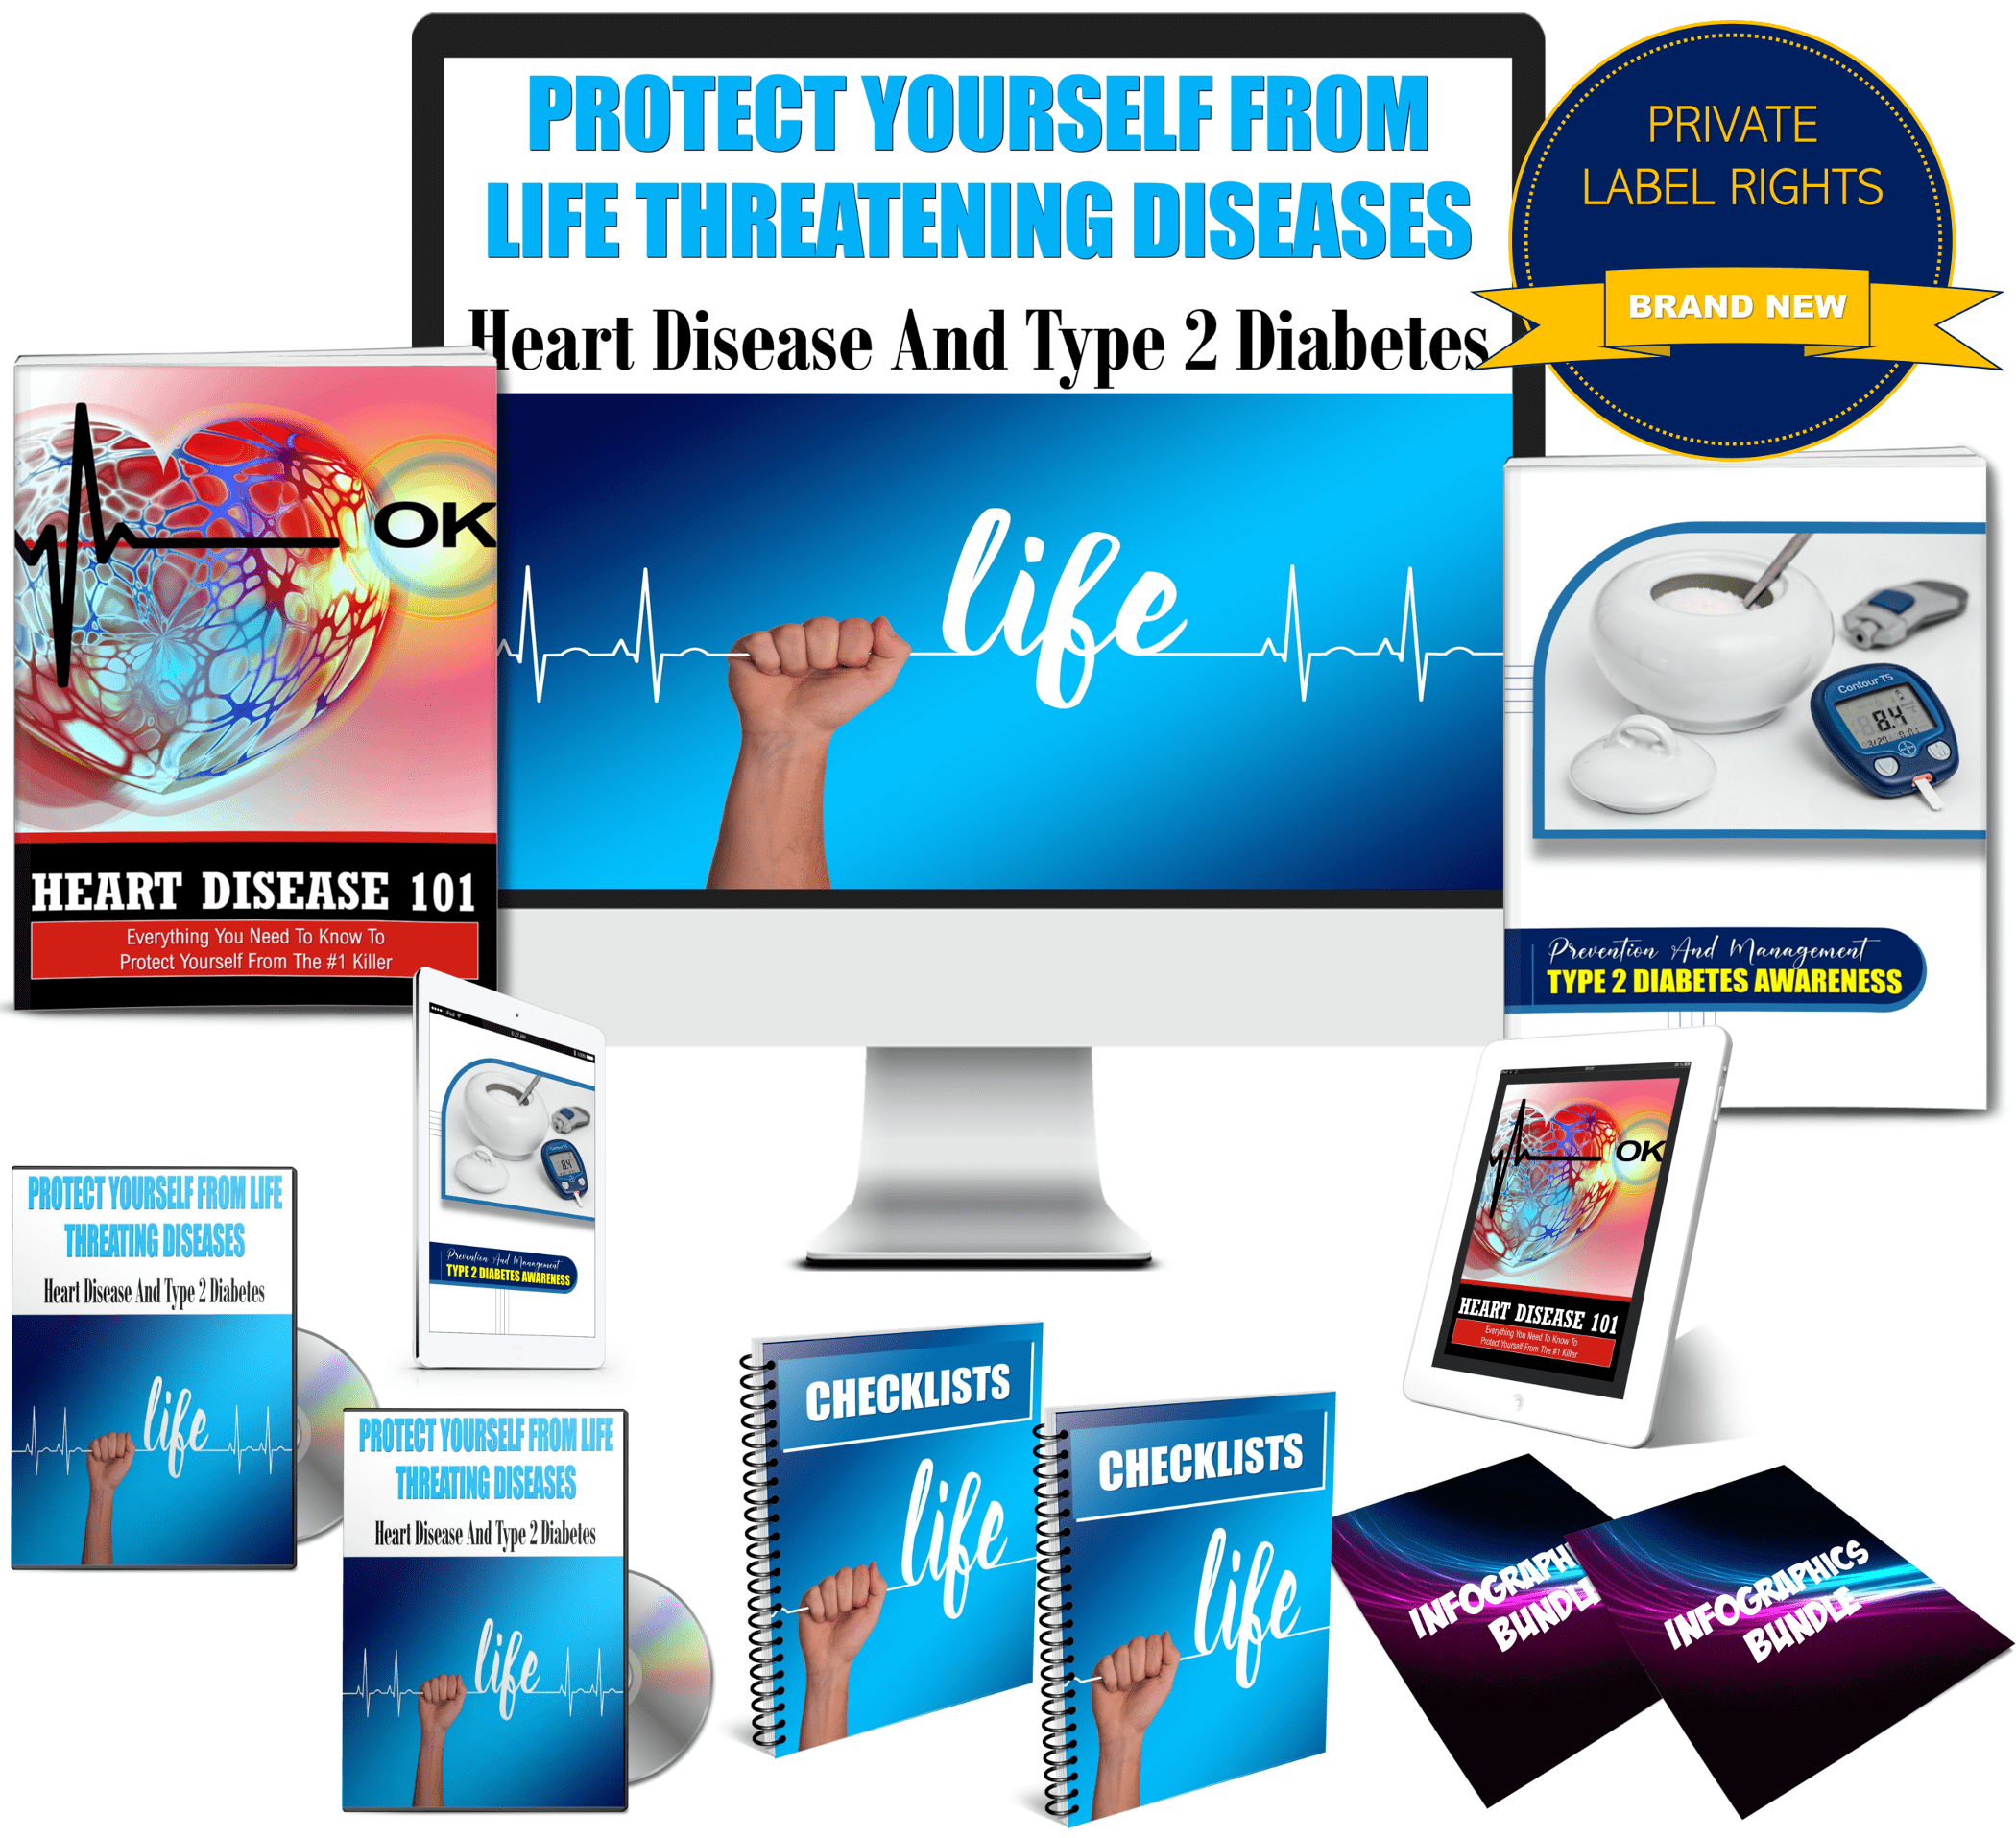 Heart Disease And Type 2 Diabetes Content Pack PLR Rights